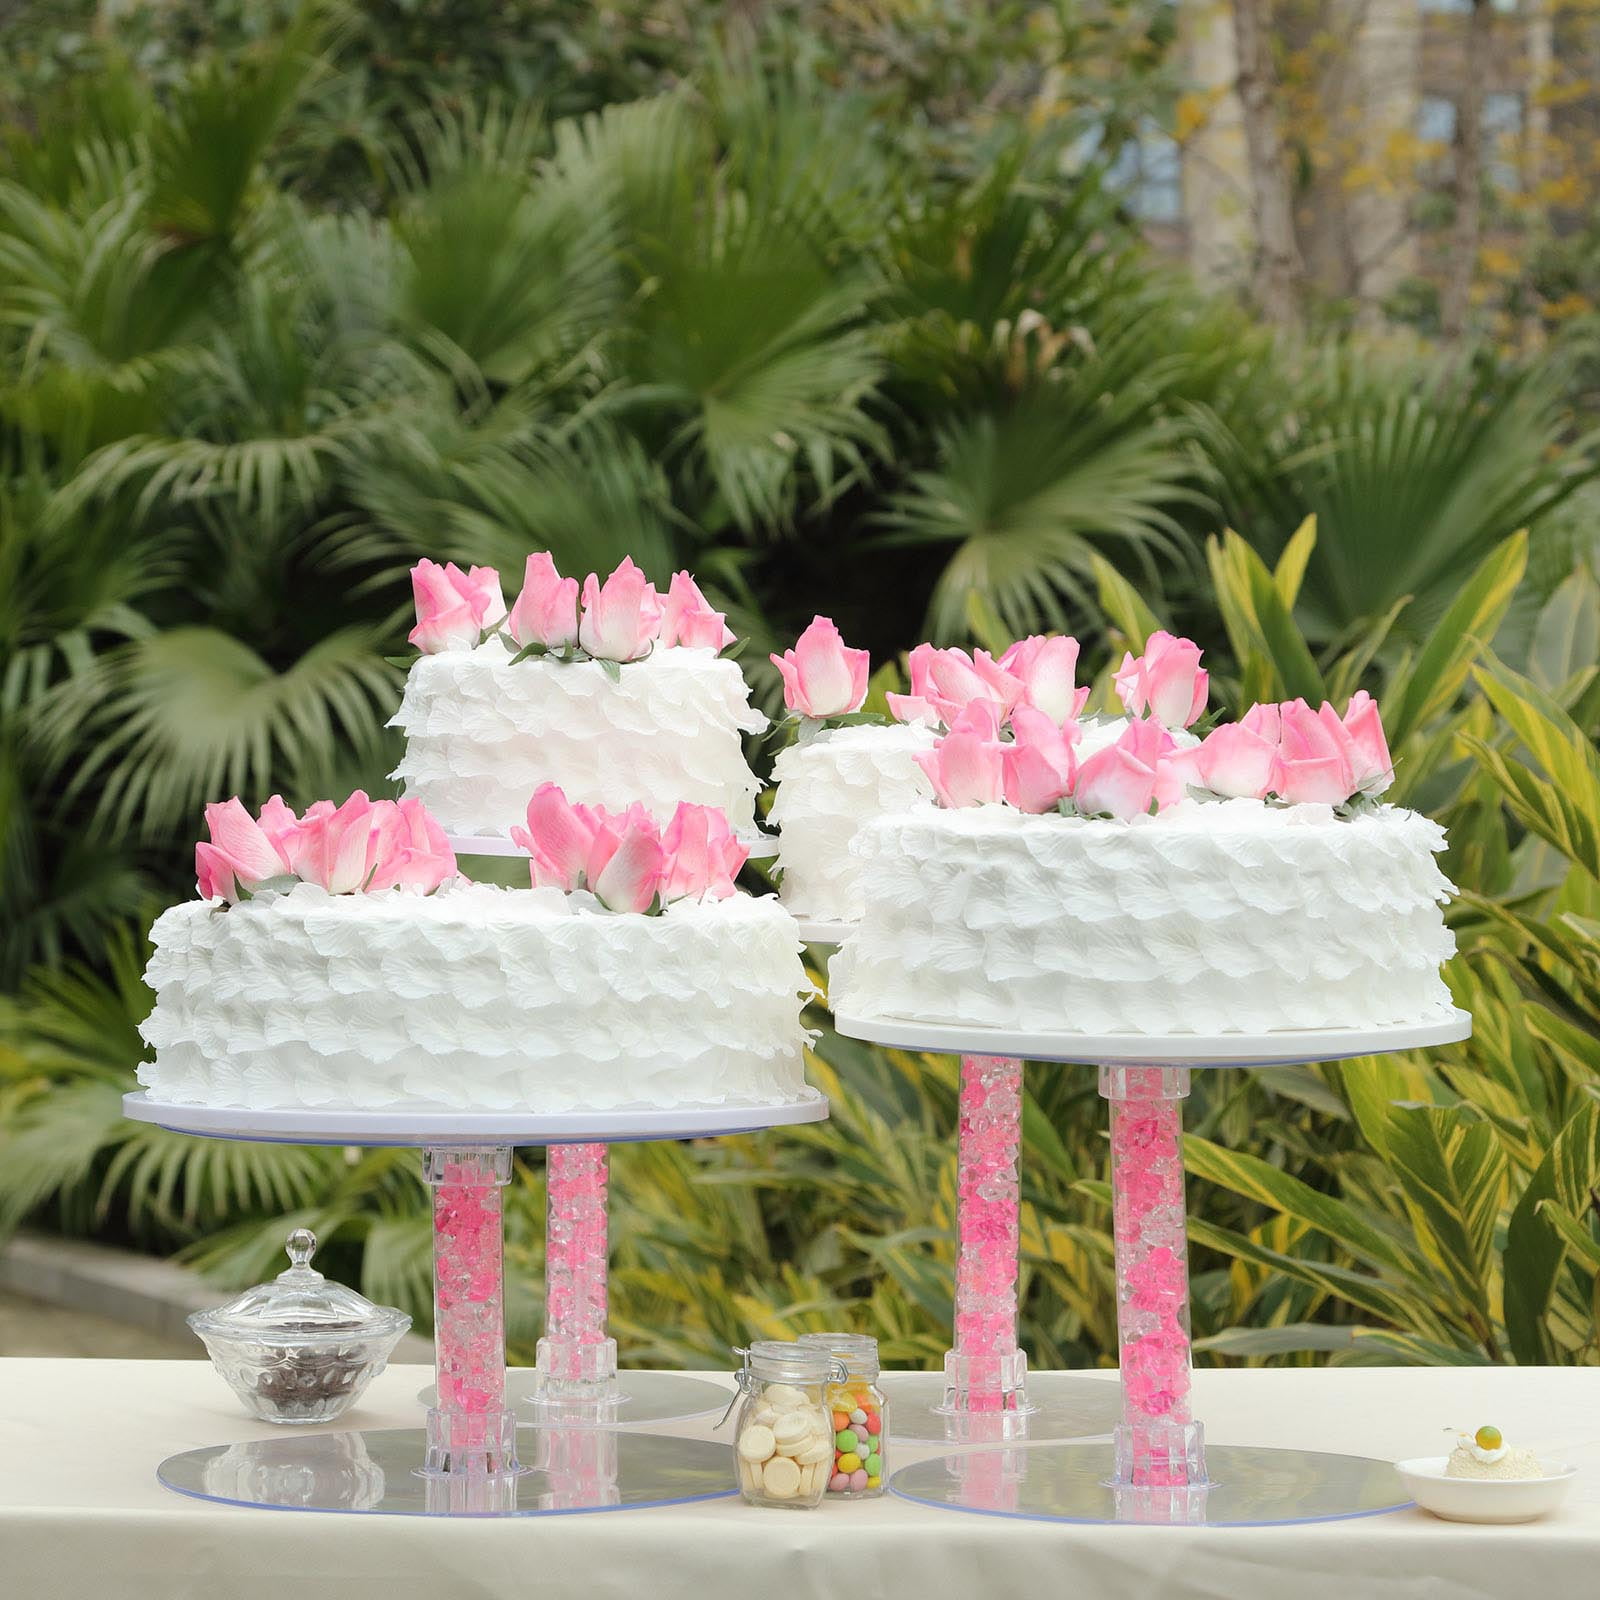 3 Tier Disposable Cupcake Cake Stand Holder Wedding Birthday Party Display 